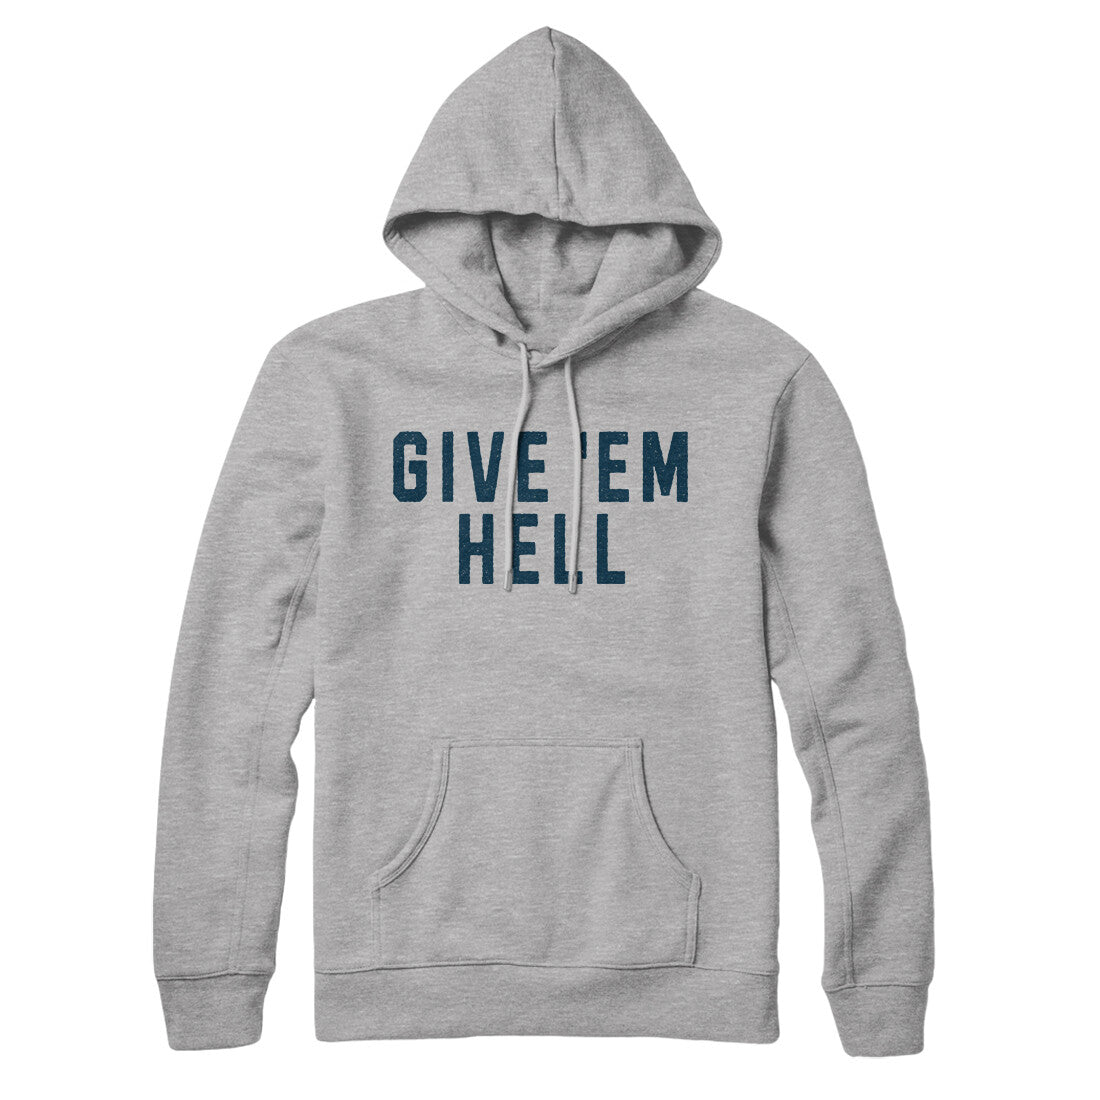 Give ‘em Hell in Heather Grey Color